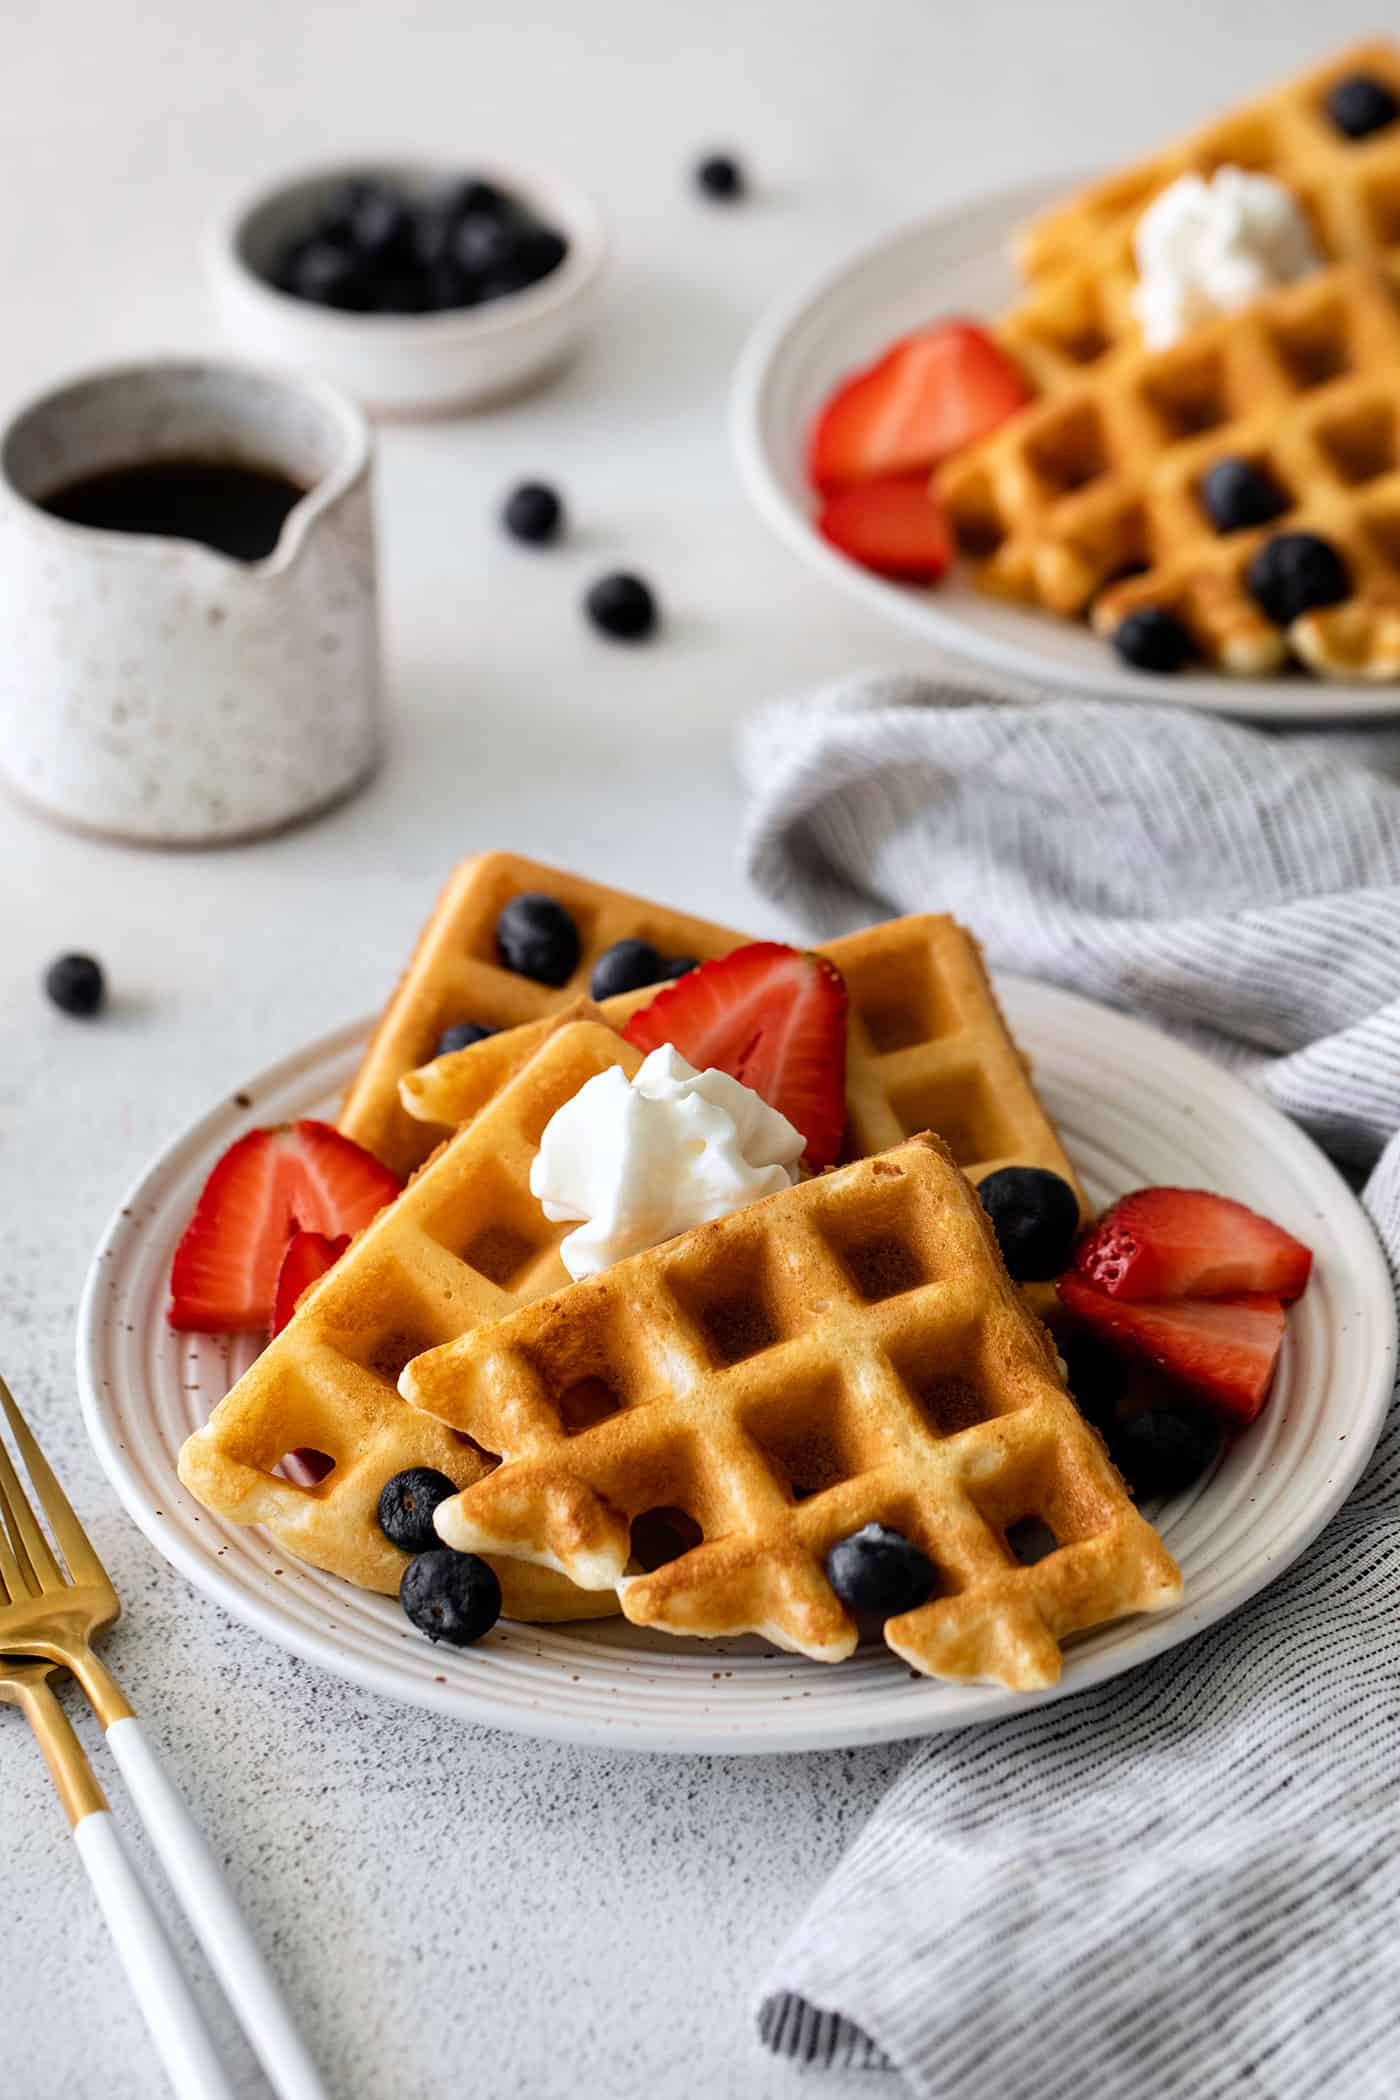 A plate of yeast waffles with berries